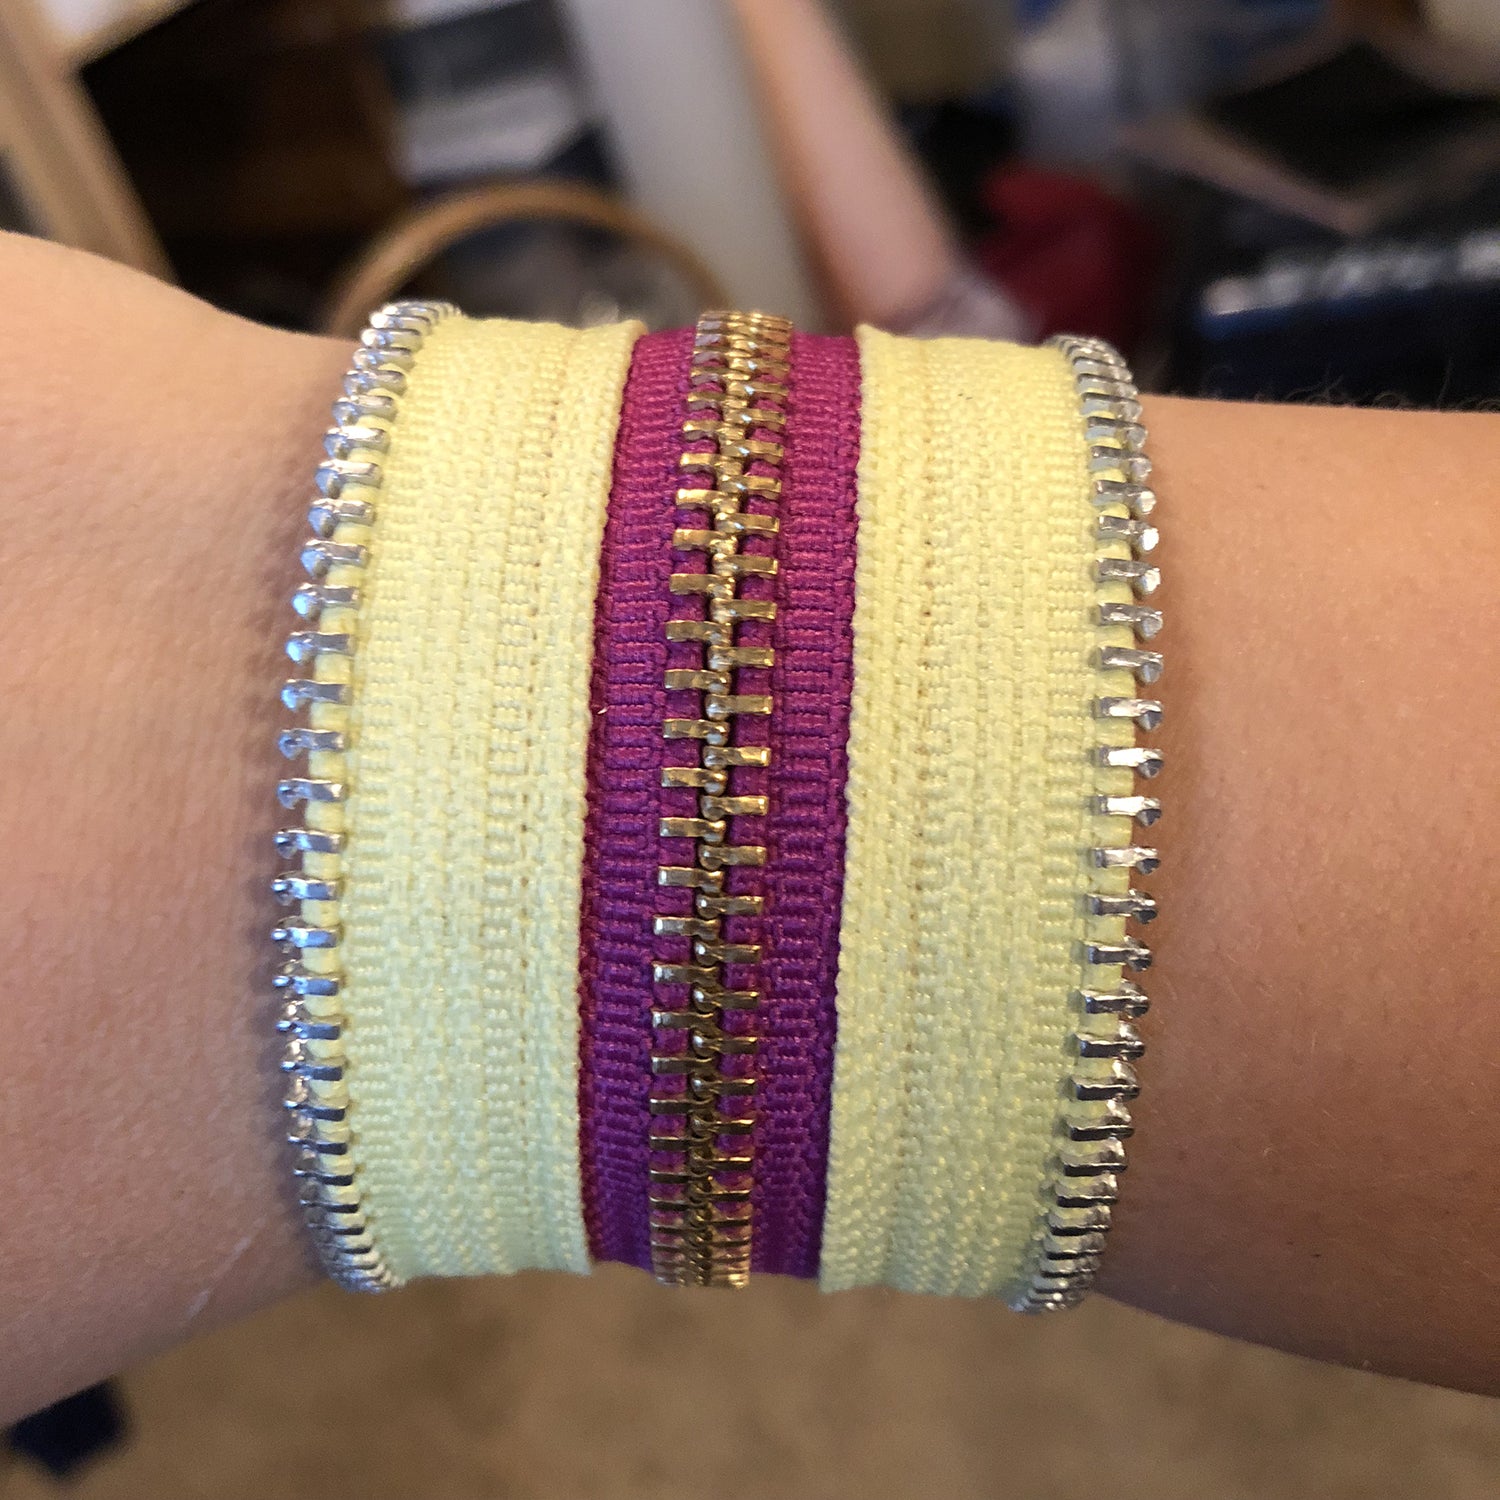 Summer Brights Collection Yellow & Electric Purple Zip Bracelet